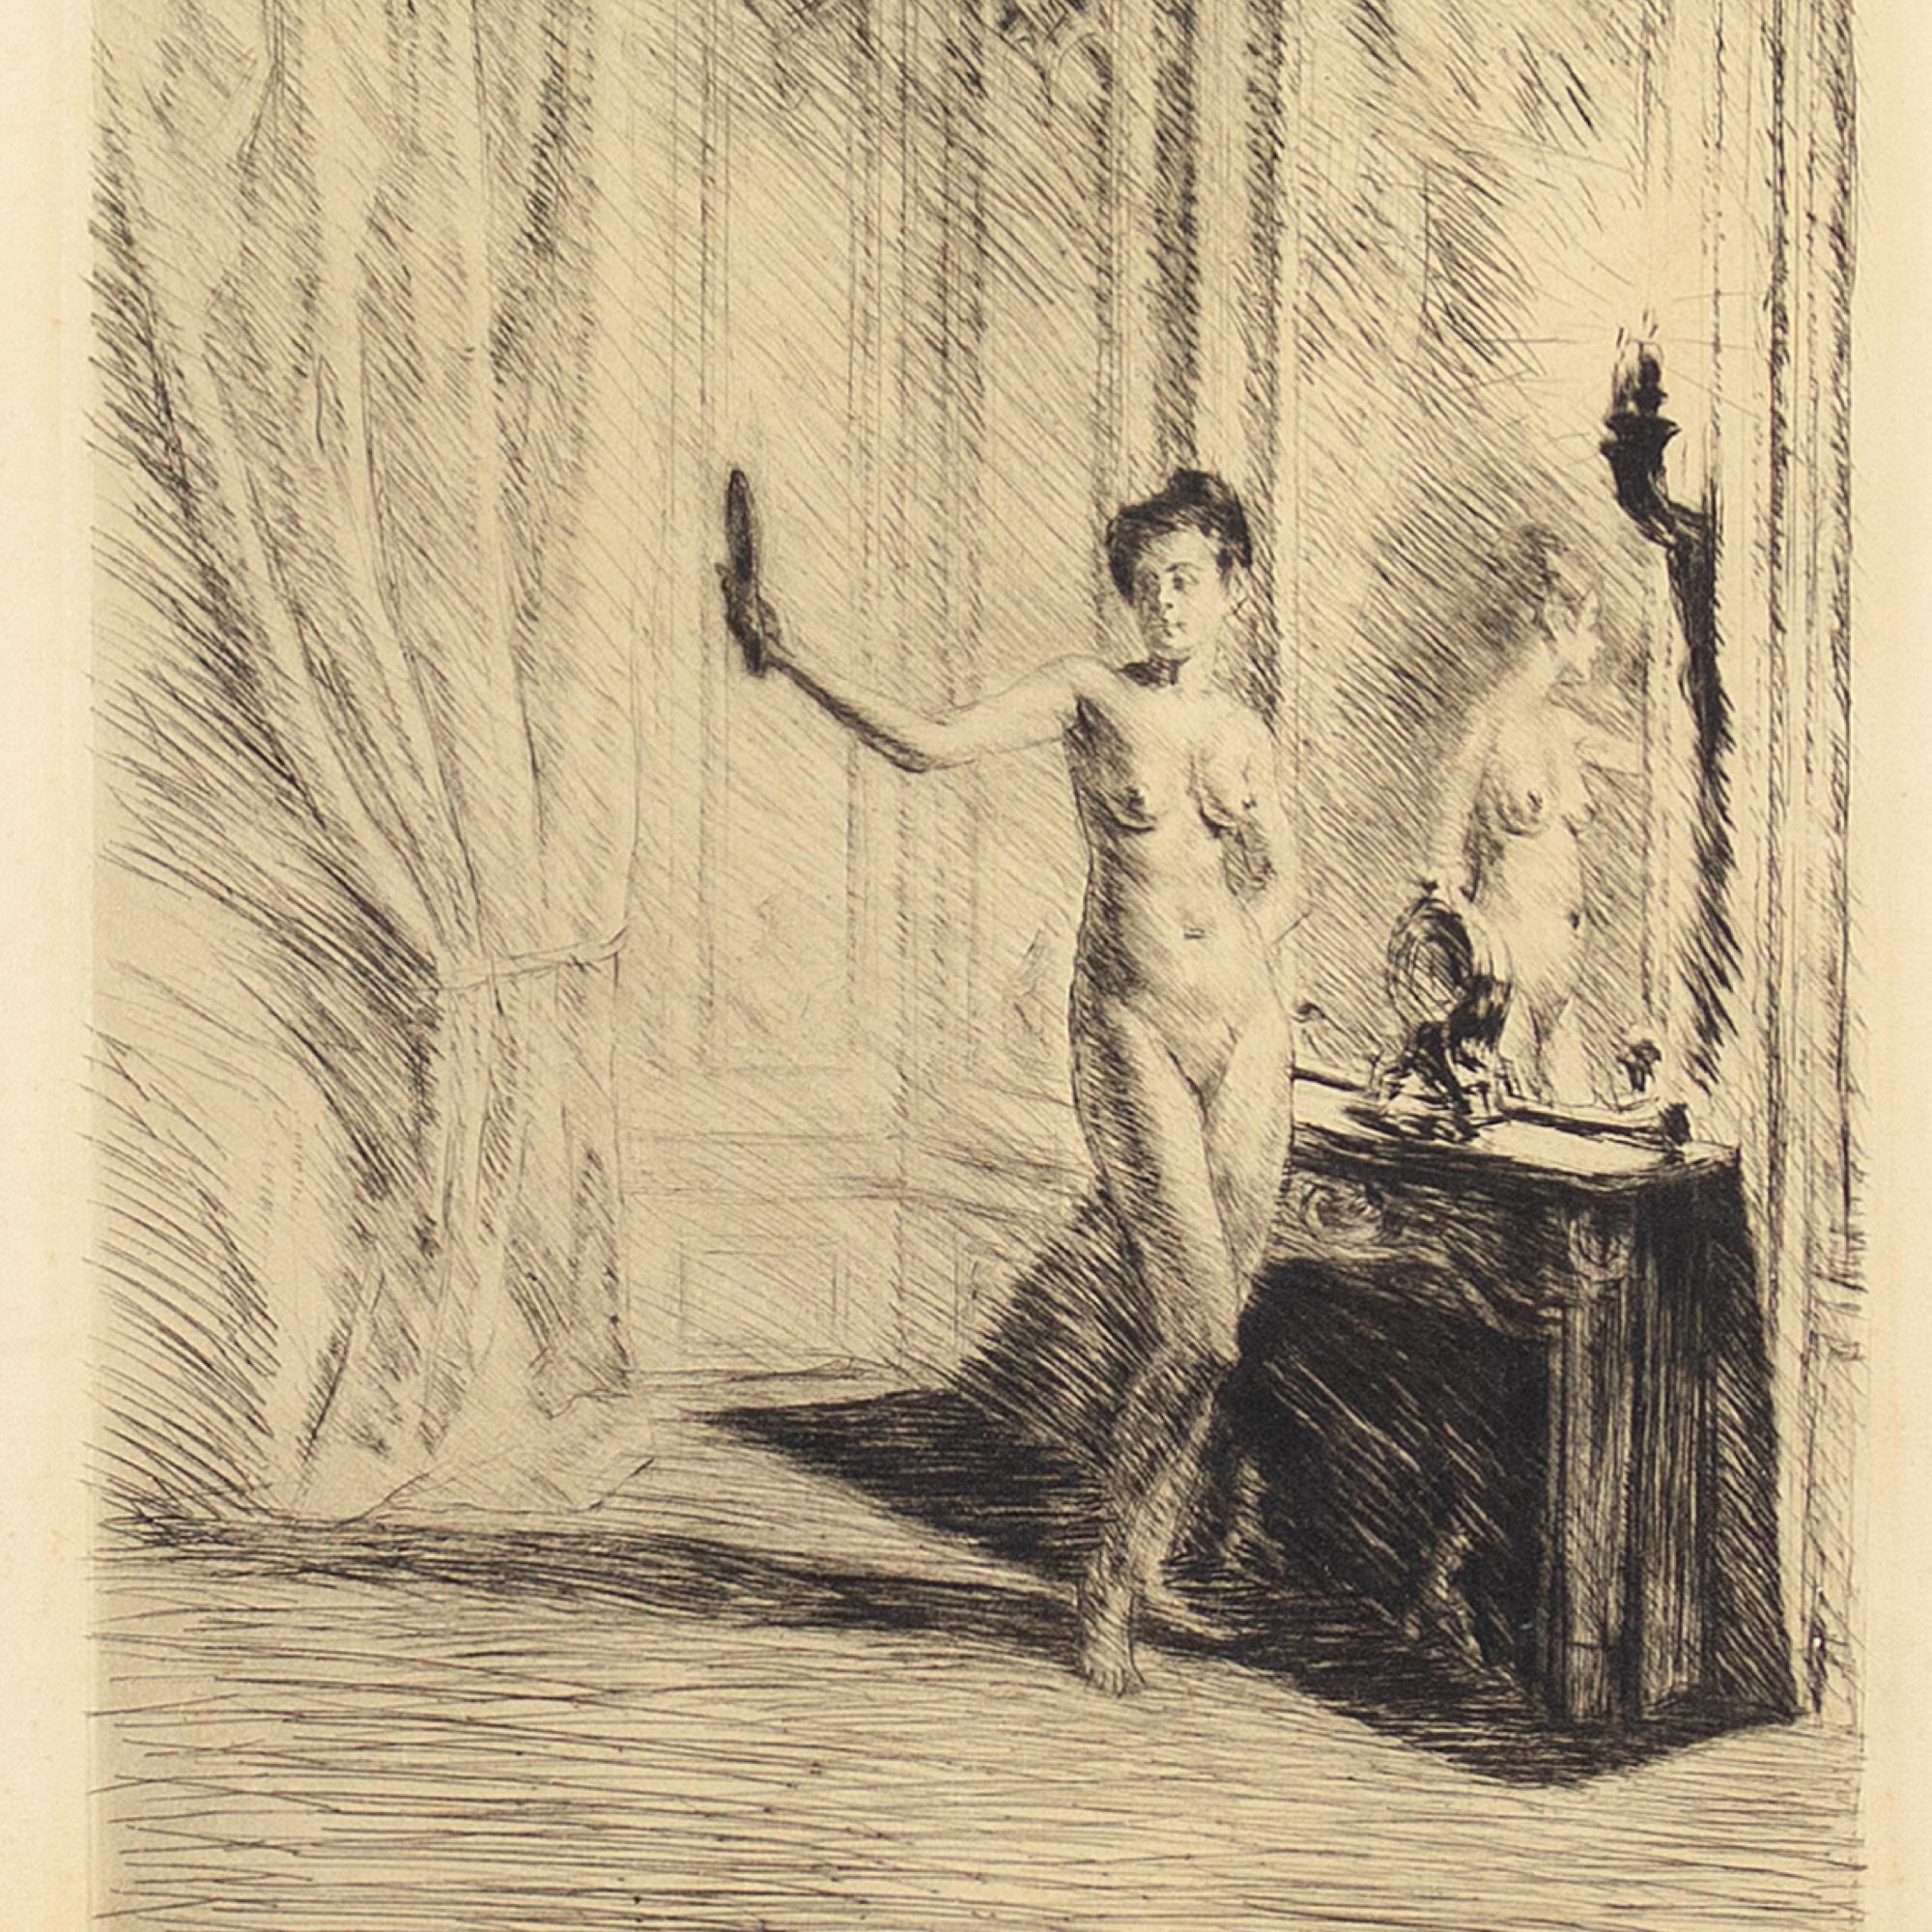 This early 20th-century etching by German artist Otto Goetze (1868-1931) depicts a nude within a bedroom setting. She poses while holding a mirror and catching her reflection. Goetze was a master of provocative scenes such as this. Seemingly